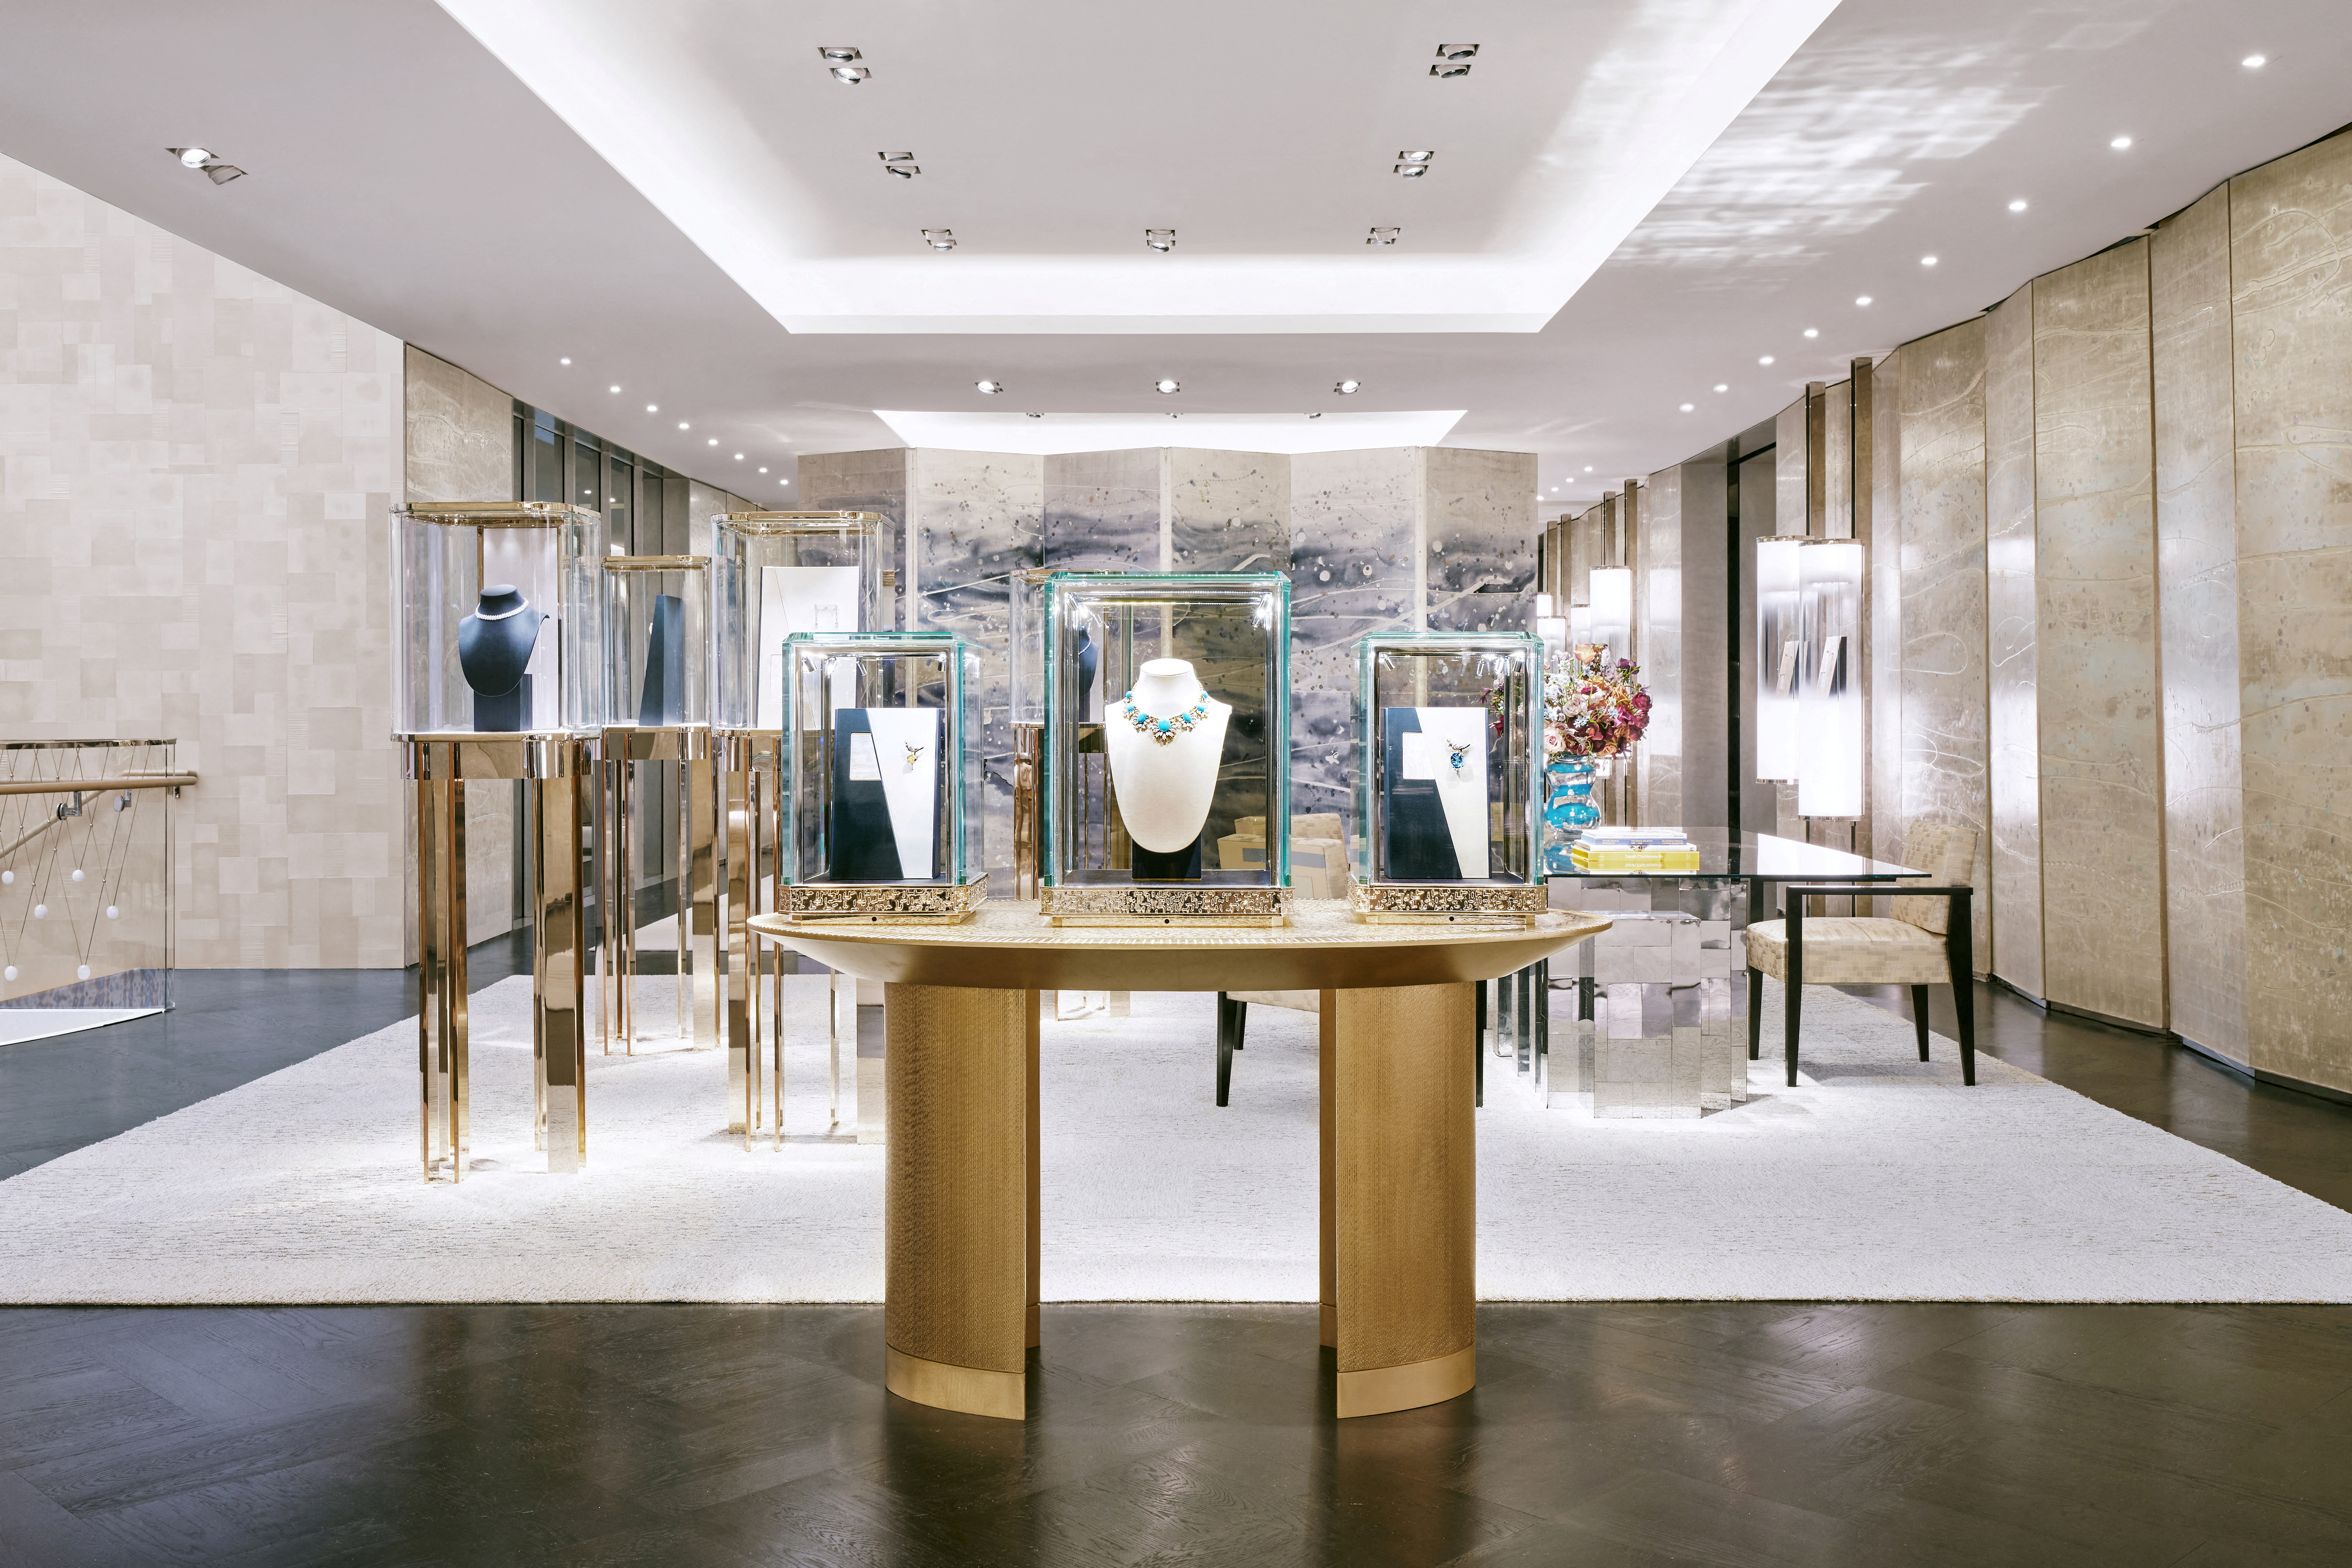 Handout photo of the interior of the new Tiffany store in New York